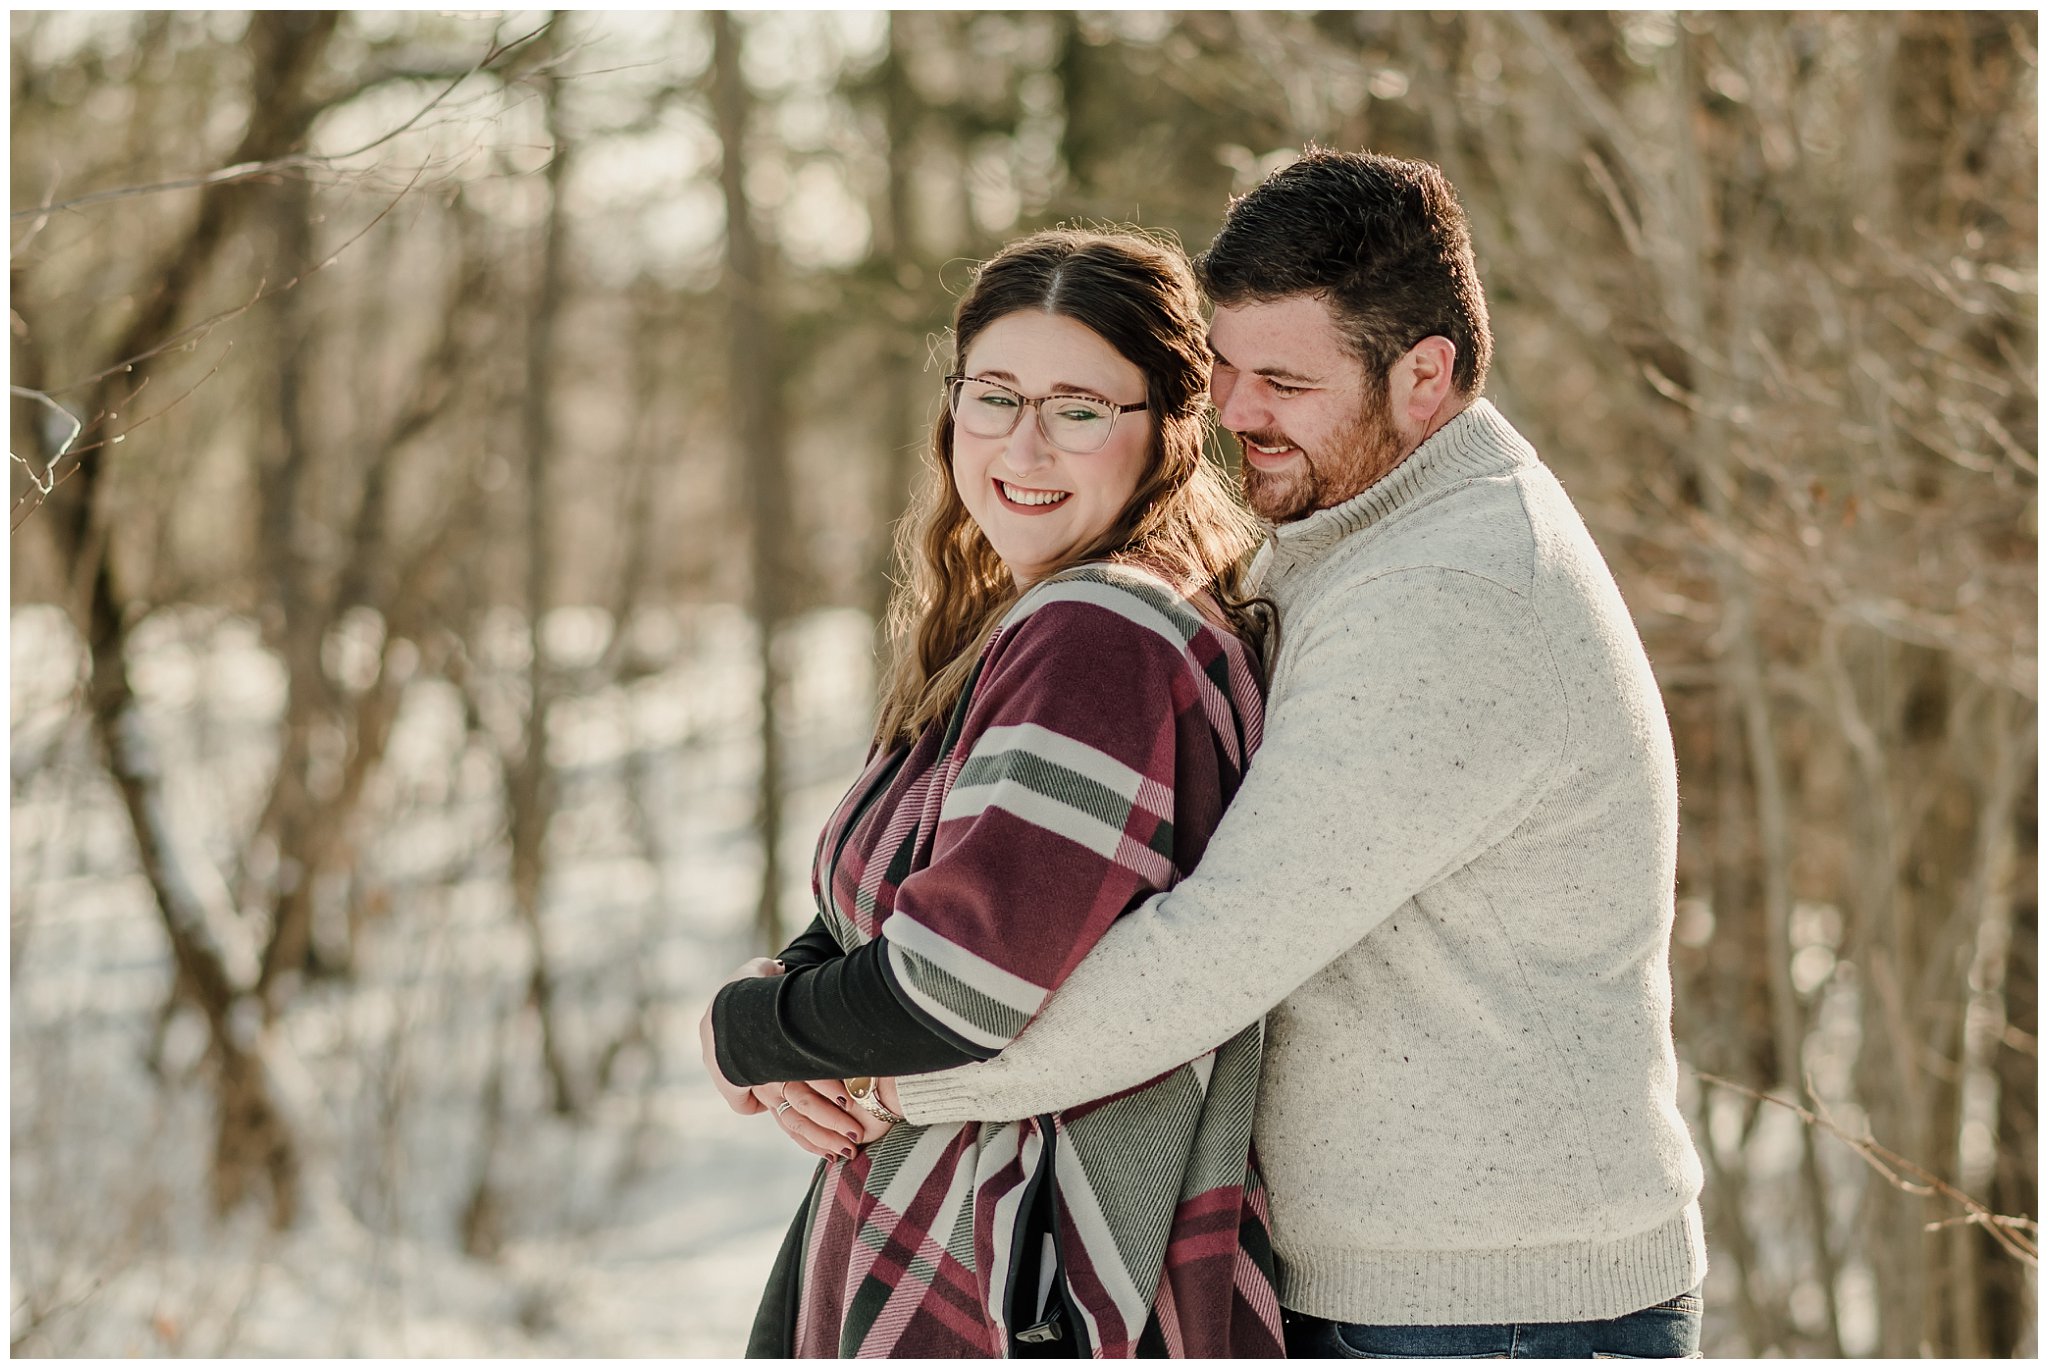 Central New York Engagement Session,Engagement Photographer,Farm Engagement Session,Upstate New York Engagement Session,Wedding Photographer,Winter Engagement Session,